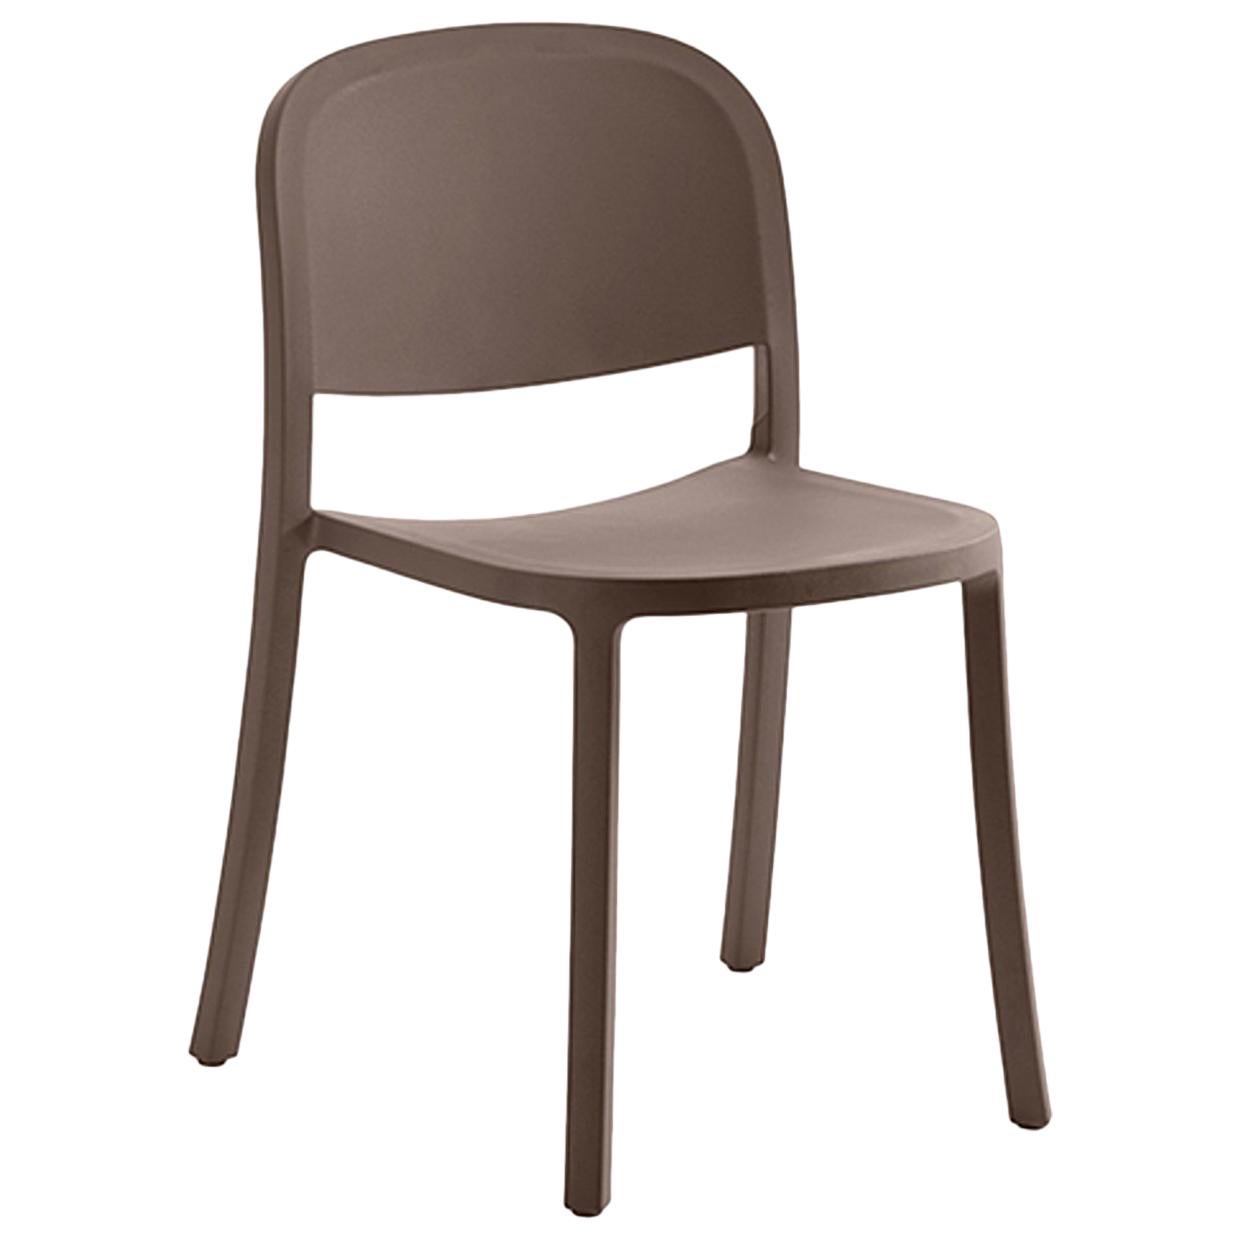 Emeco 1 Inch Reclaimed Chair in Brown by Jasper Morrison